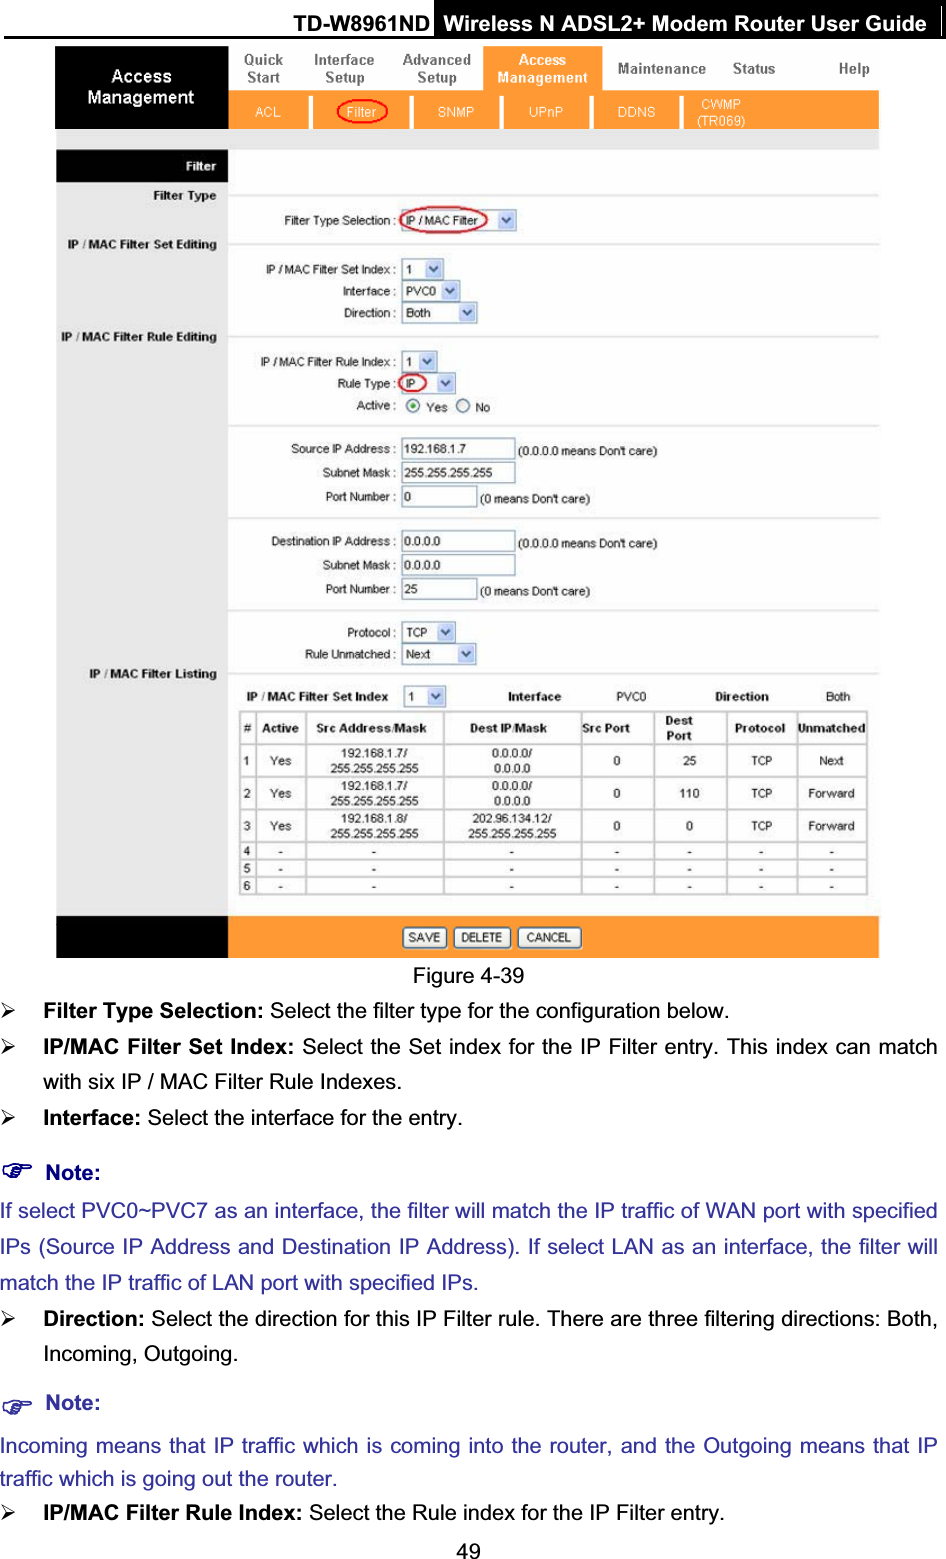 TD-W8961ND Wireless N ADSL2+ Modem Router User Guide49Figure 4-39 ¾Filter Type Selection: Select the filter type for the configuration below. ¾IP/MAC Filter Set Index: Select the Set index for the IP Filter entry. This index can match with six IP / MAC Filter Rule Indexes. ¾Interface: Select the interface for the entry. )Note:If select PVC0~PVC7 as an interface, the filter will match the IP traffic of WAN port with specified IPs (Source IP Address and Destination IP Address). If select LAN as an interface, the filter will match the IP traffic of LAN port with specified IPs. ¾Direction: Select the direction for this IP Filter rule. There are three filtering directions: Both, Incoming, Outgoing. )Note:Incoming means that IP traffic which is coming into the router, and the Outgoing means that IP traffic which is going out the router. ¾IP/MAC Filter Rule Index: Select the Rule index for the IP Filter entry. 